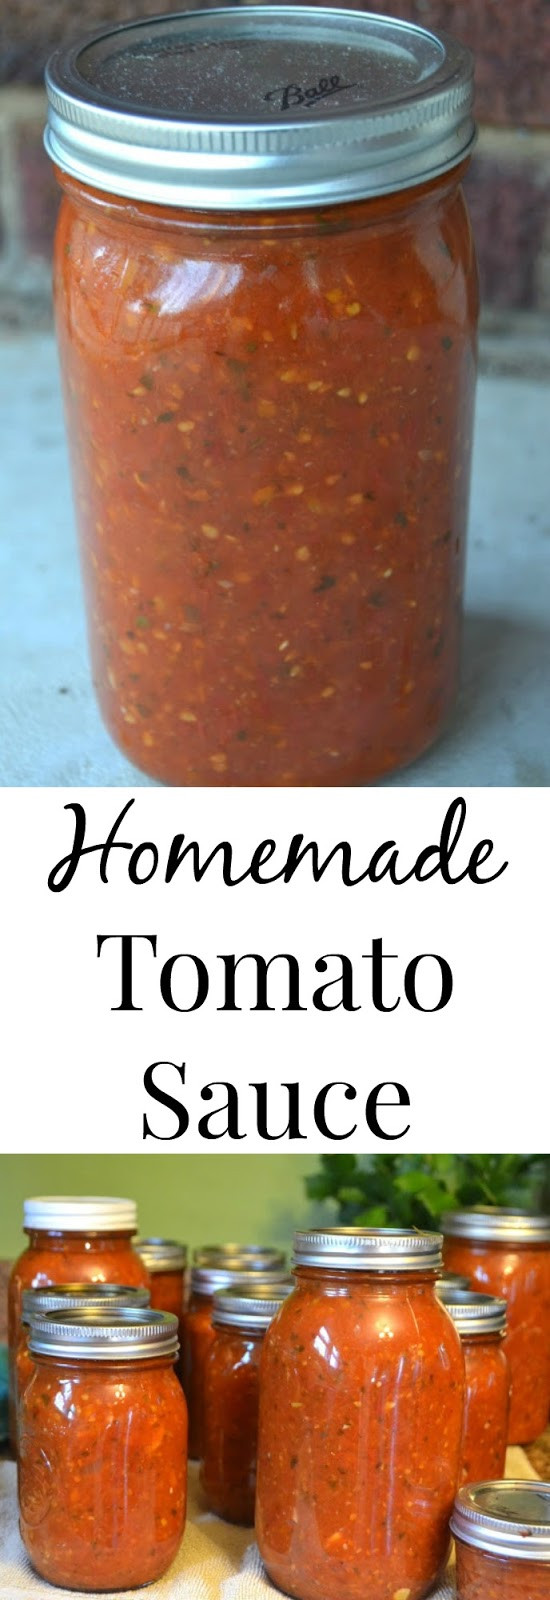 Homemade Spaghetti Sauce With Fresh Tomatoes For Canning
 Homemade Tomato Sauce